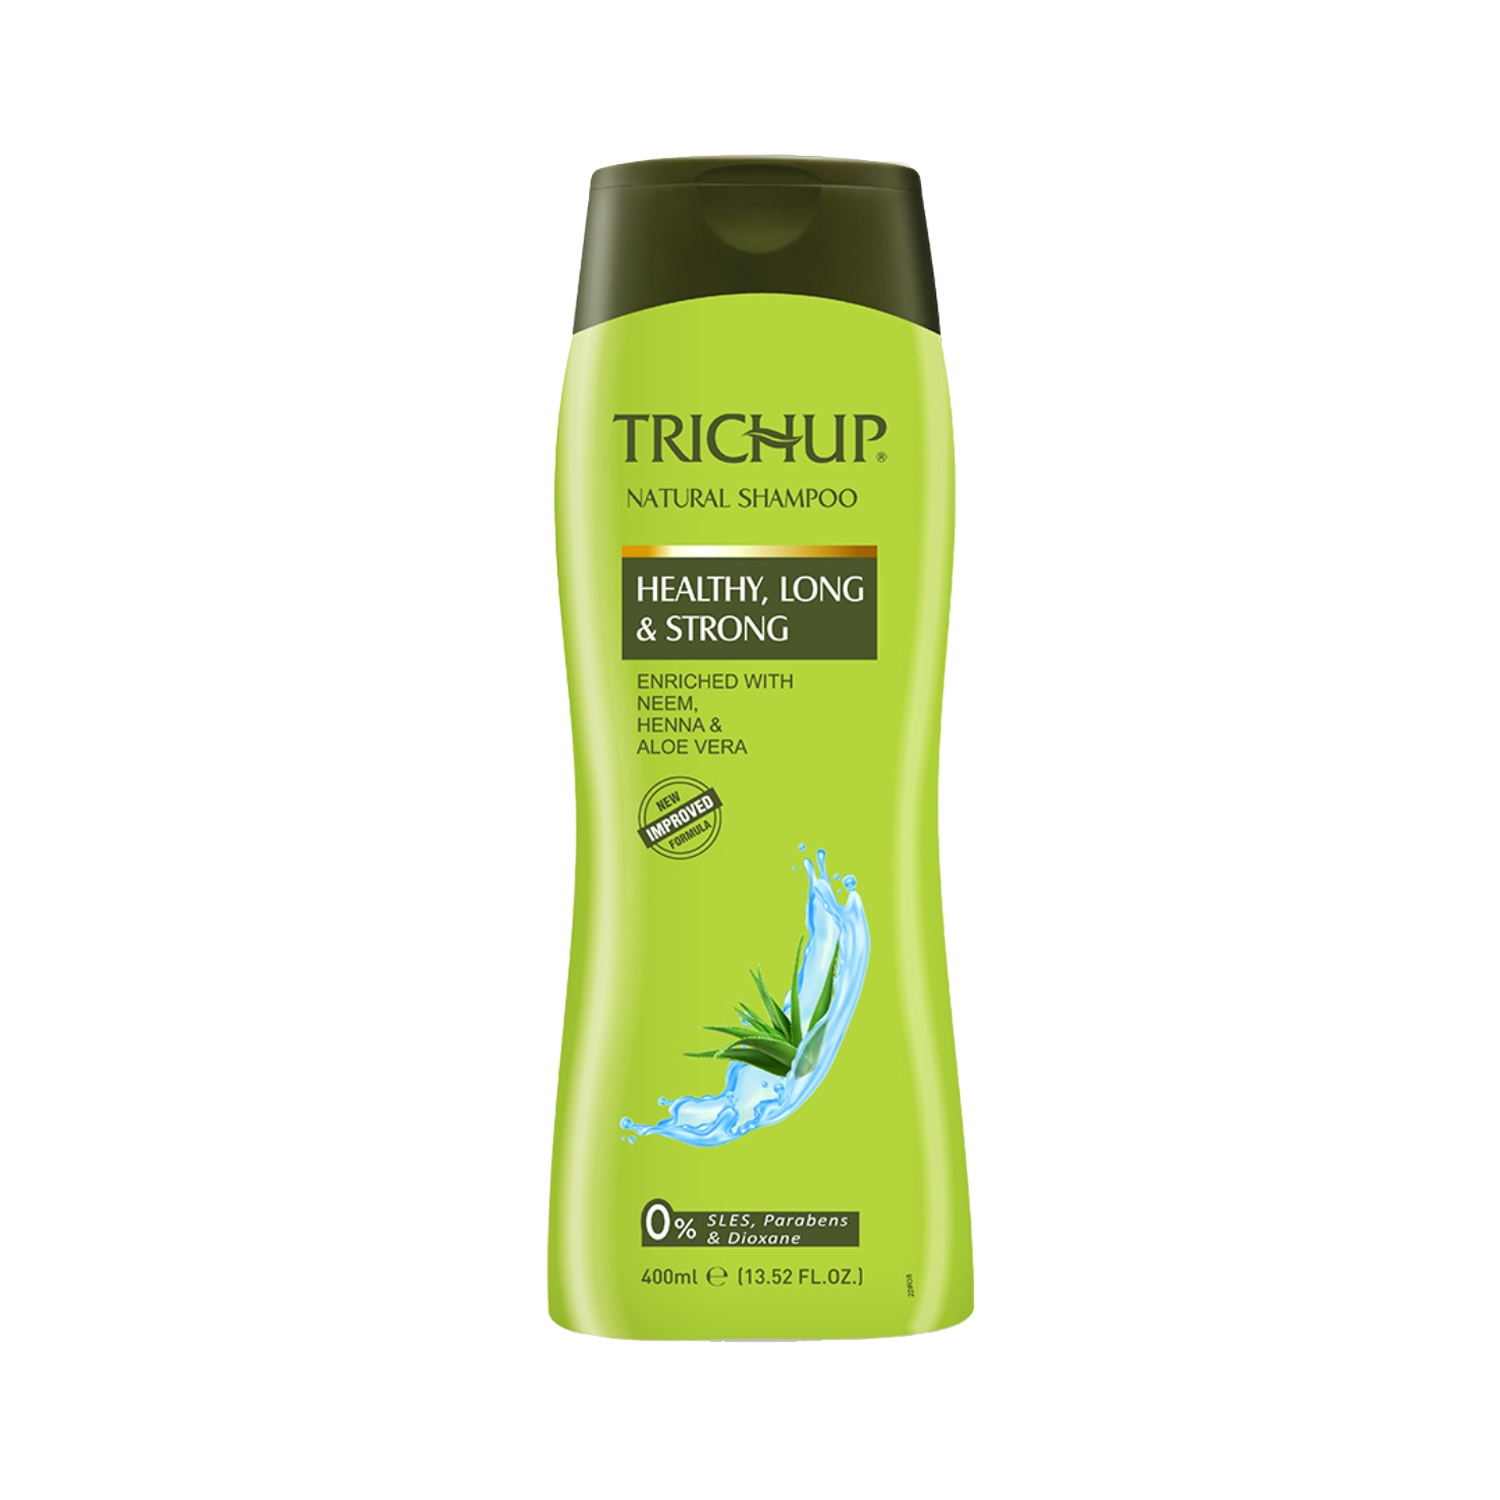 Trichup | Trichup Healthy Long & Strong Natural Shampoo (400ml)